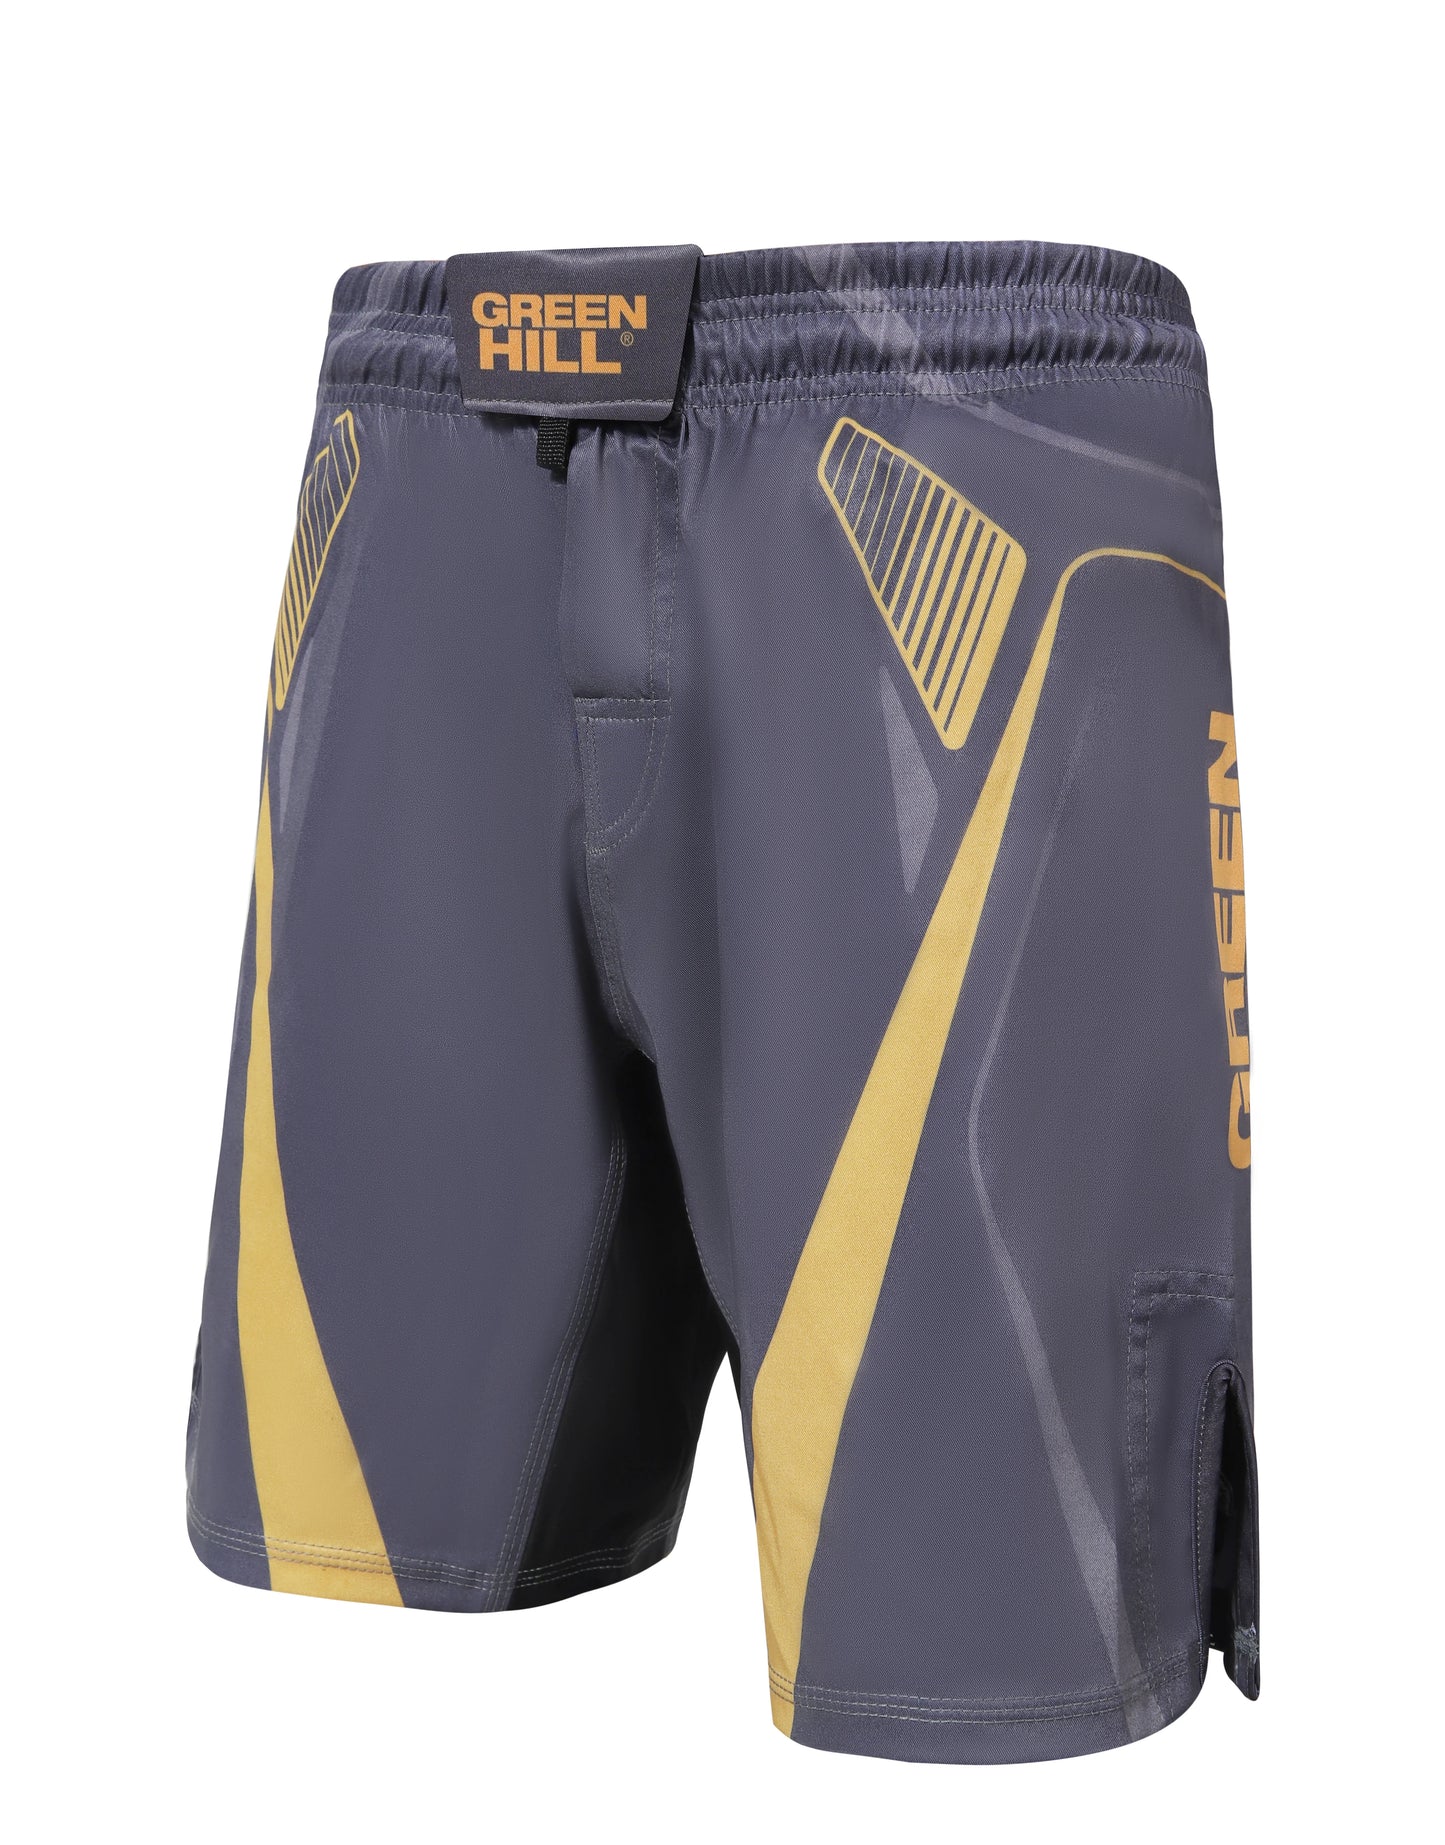 GREEN HILL NEW MMA SHORTS IMMAF APPROVED GREY 2023